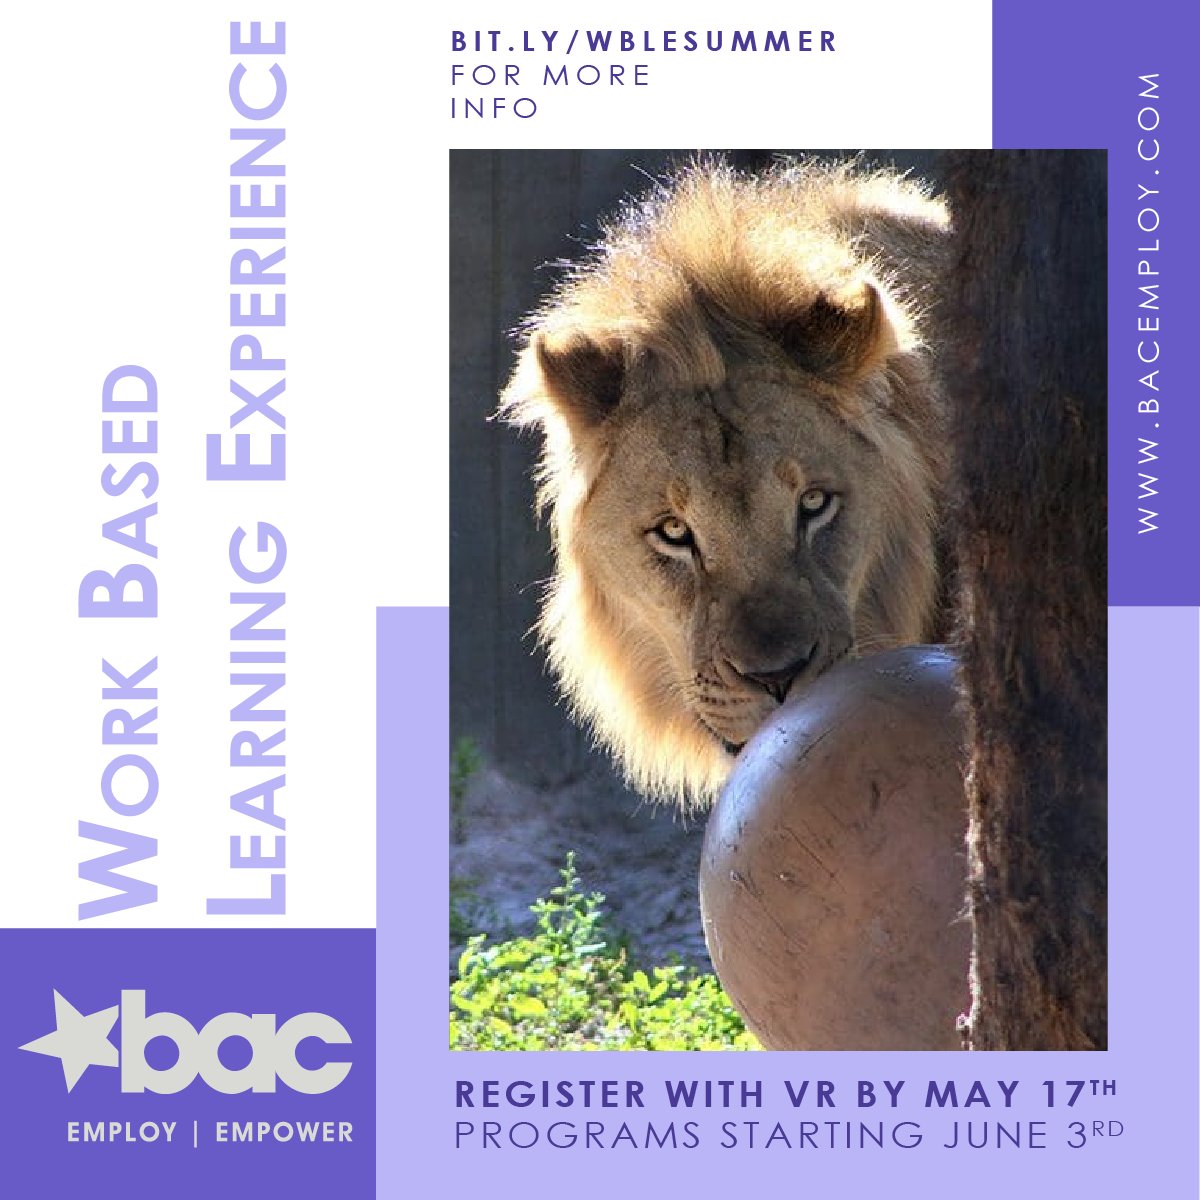 🐾 This summer, go wild at Brevard Zoo! Be a Keeper Aide, Commissary Assistant, or join Adventure Services. Learn, work, and play outdoors. 🌳 📅 June 3-20 & July 8-25 📍 Melbourne, FL ⏰ 9:00 AM - 2:30 PM Spaces are filling fast! bit.ly/WBLESummer #LearnToEarn